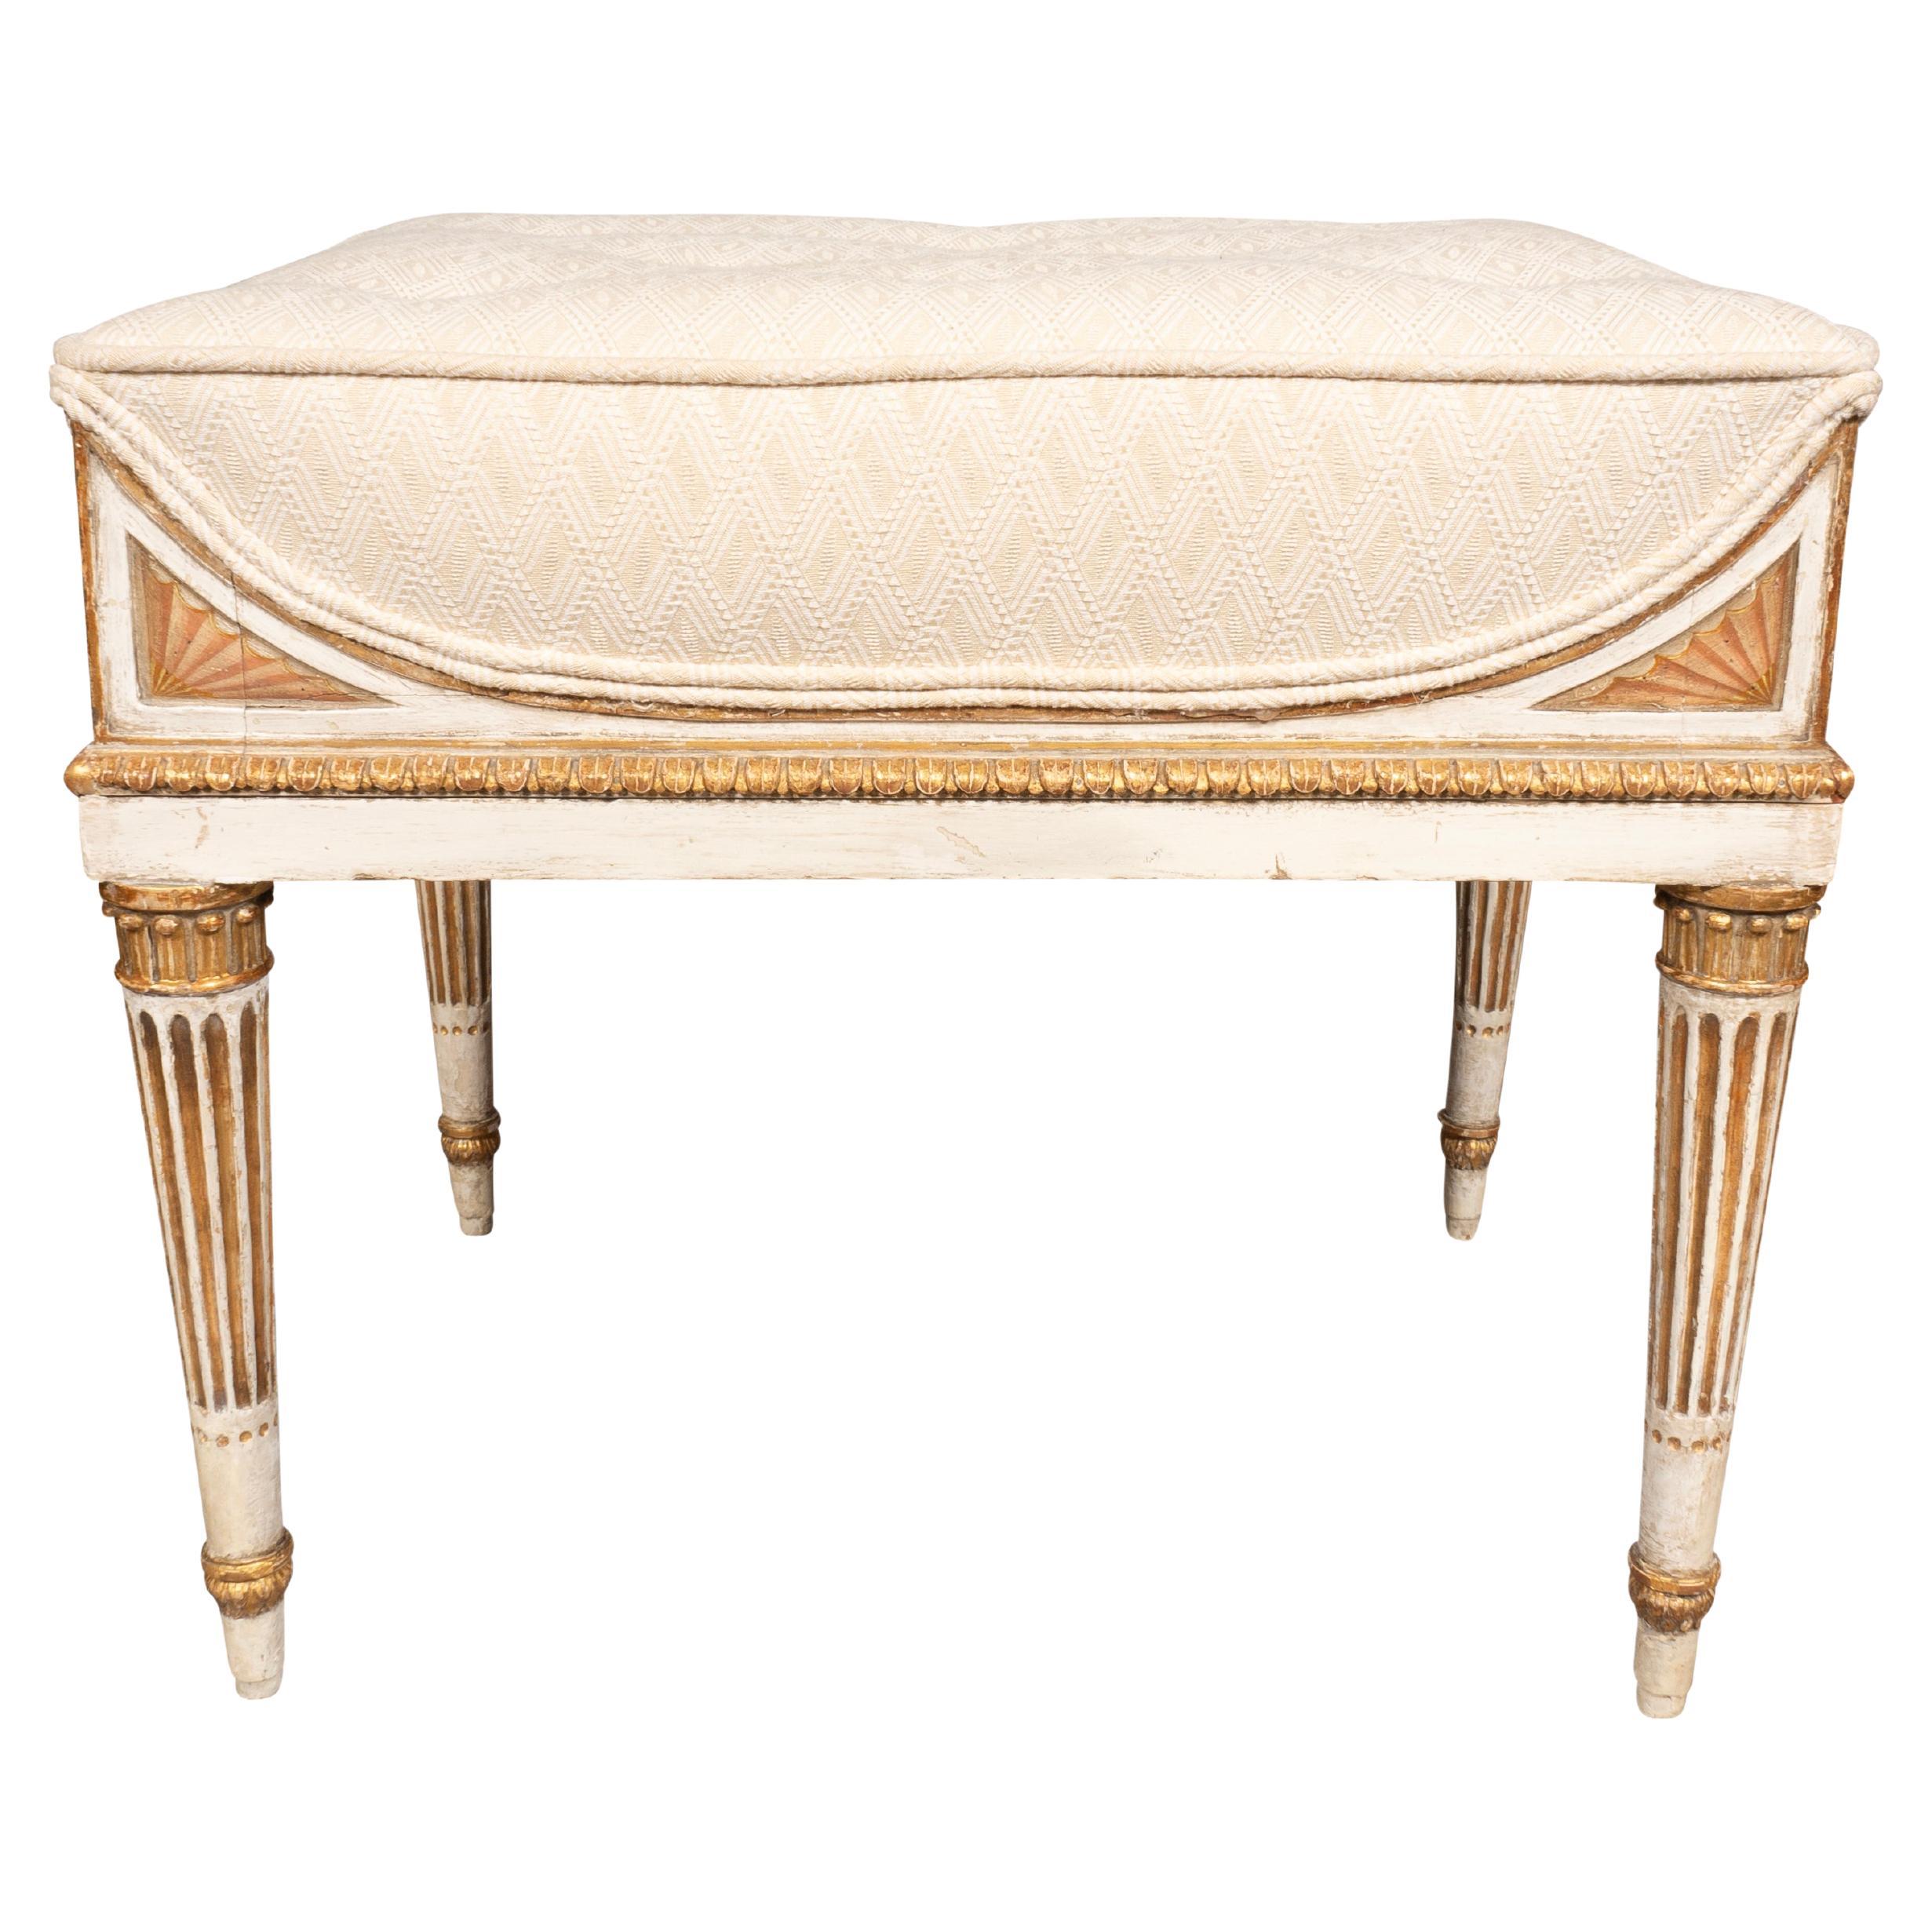  German Neoclassical Creme Painted And Giltwood Bench From Schloss Seelowitz For Sale